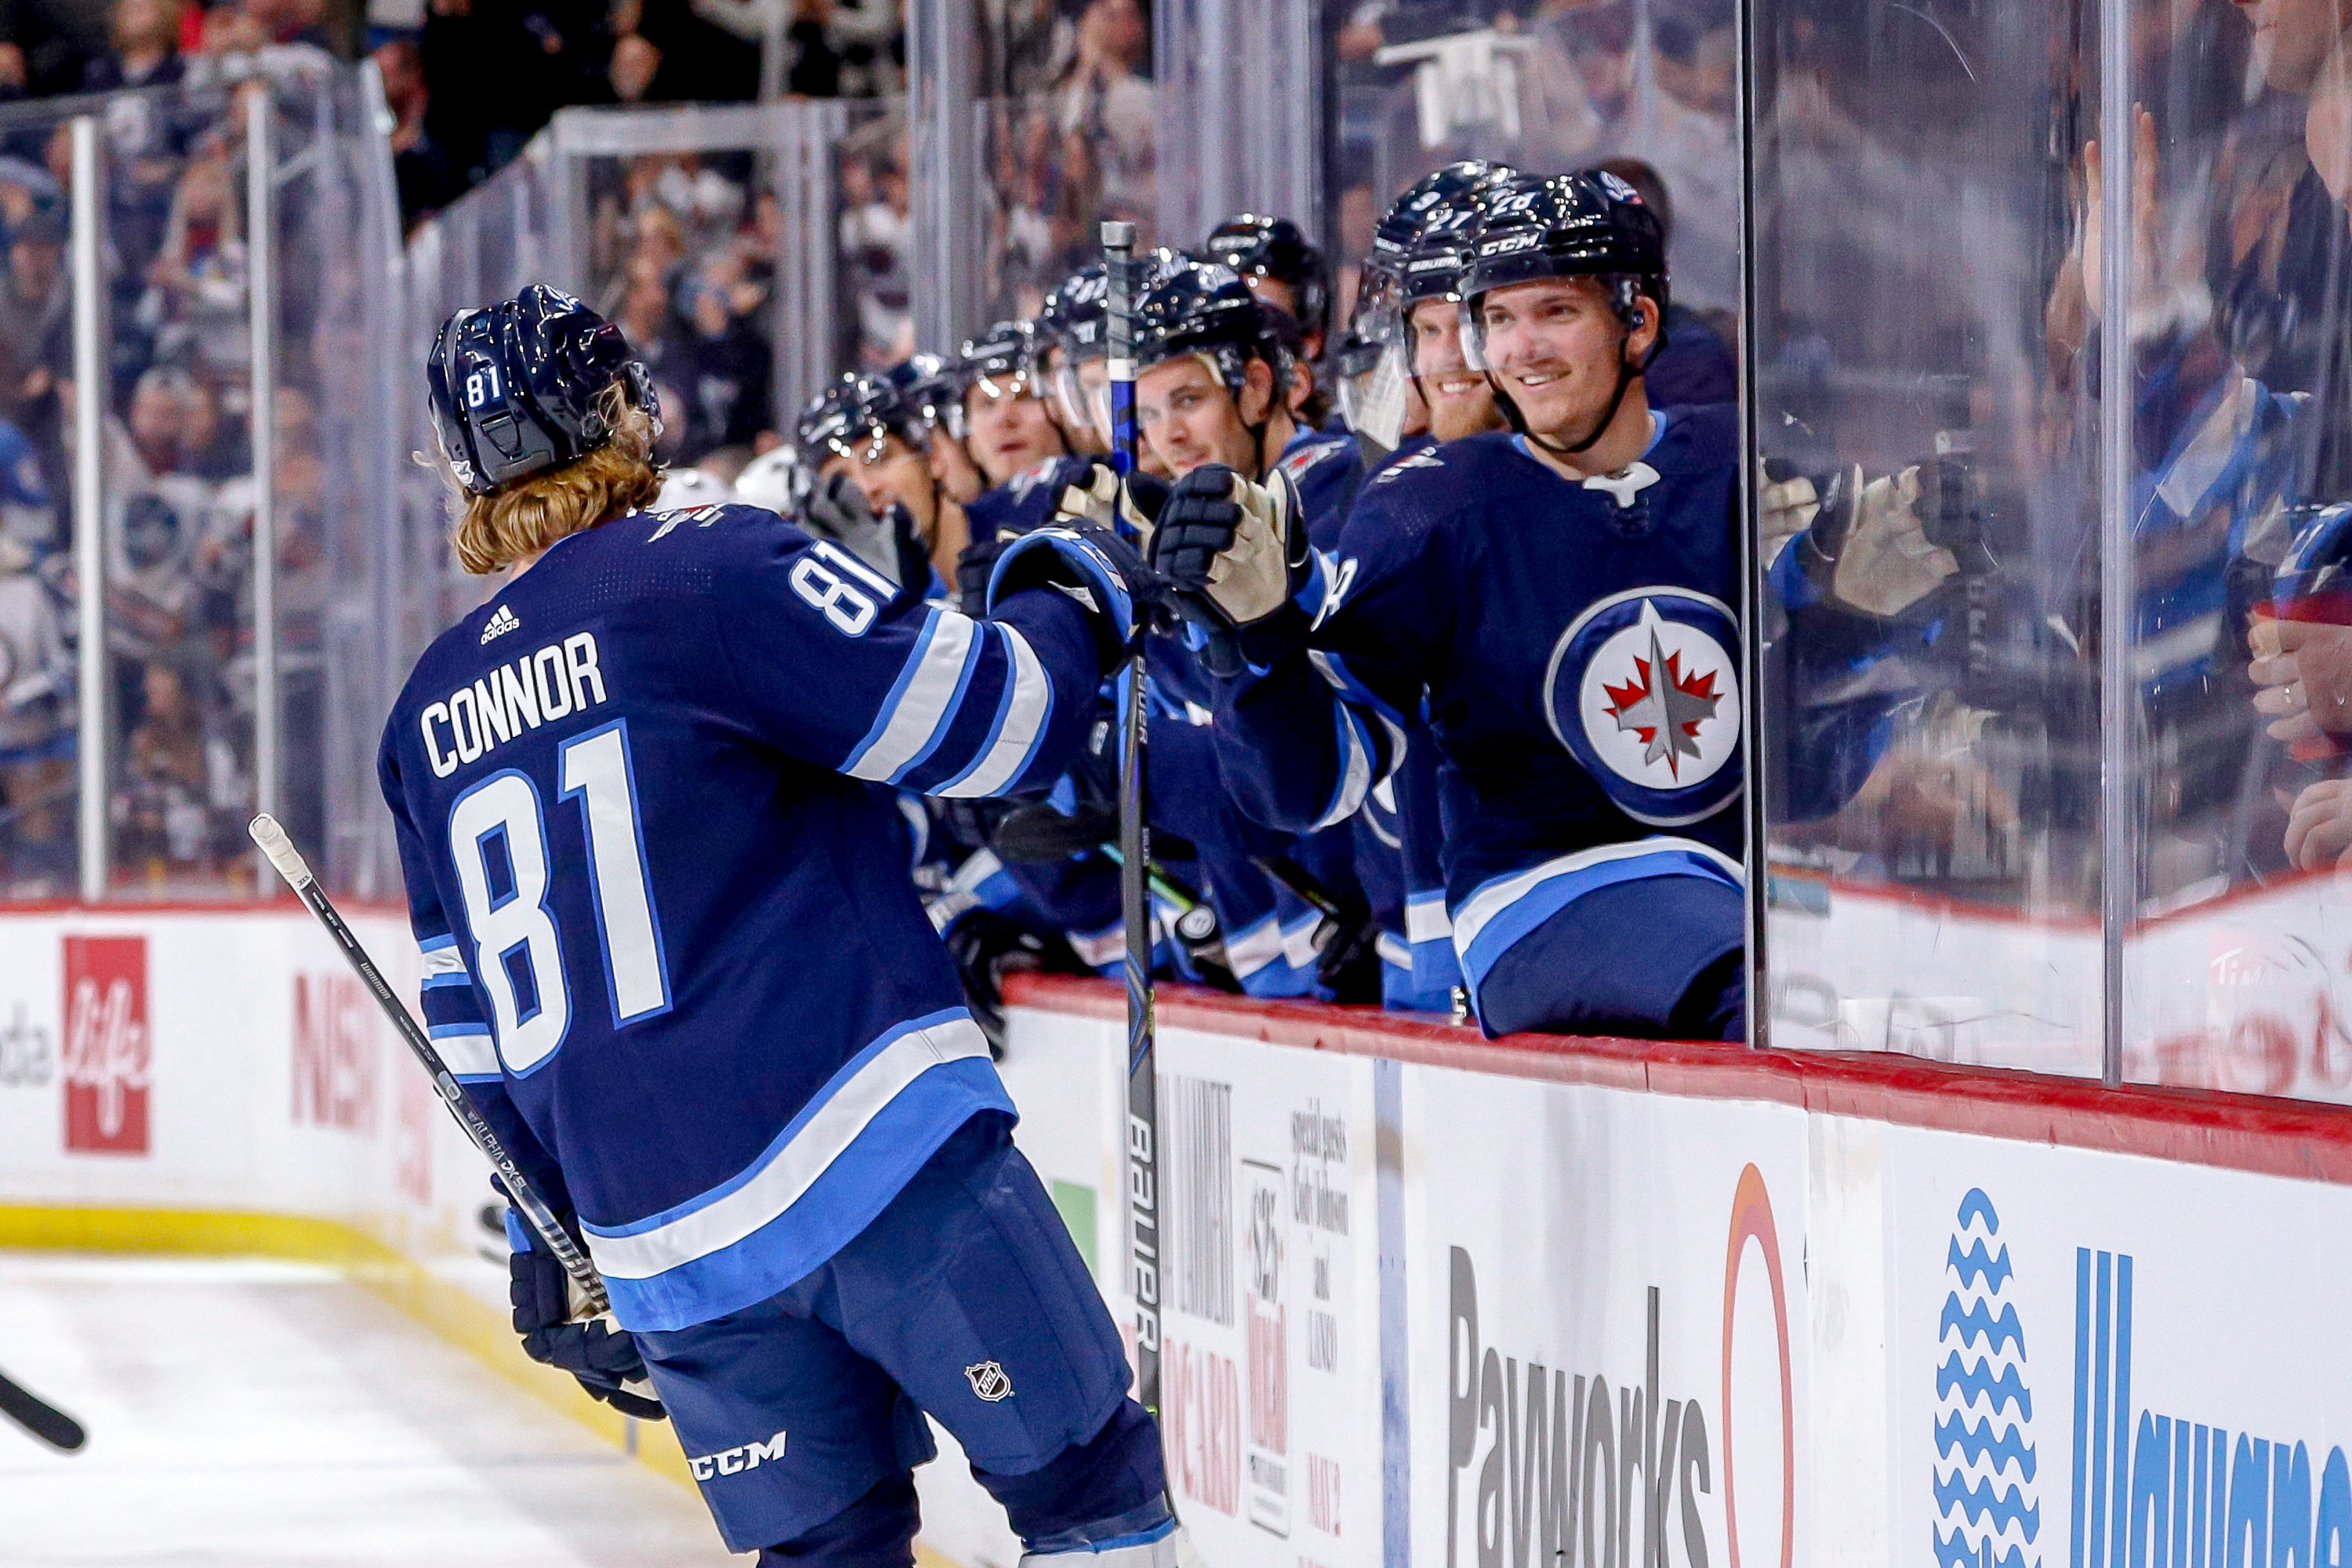 Jets hope to stay hot at home against Kings